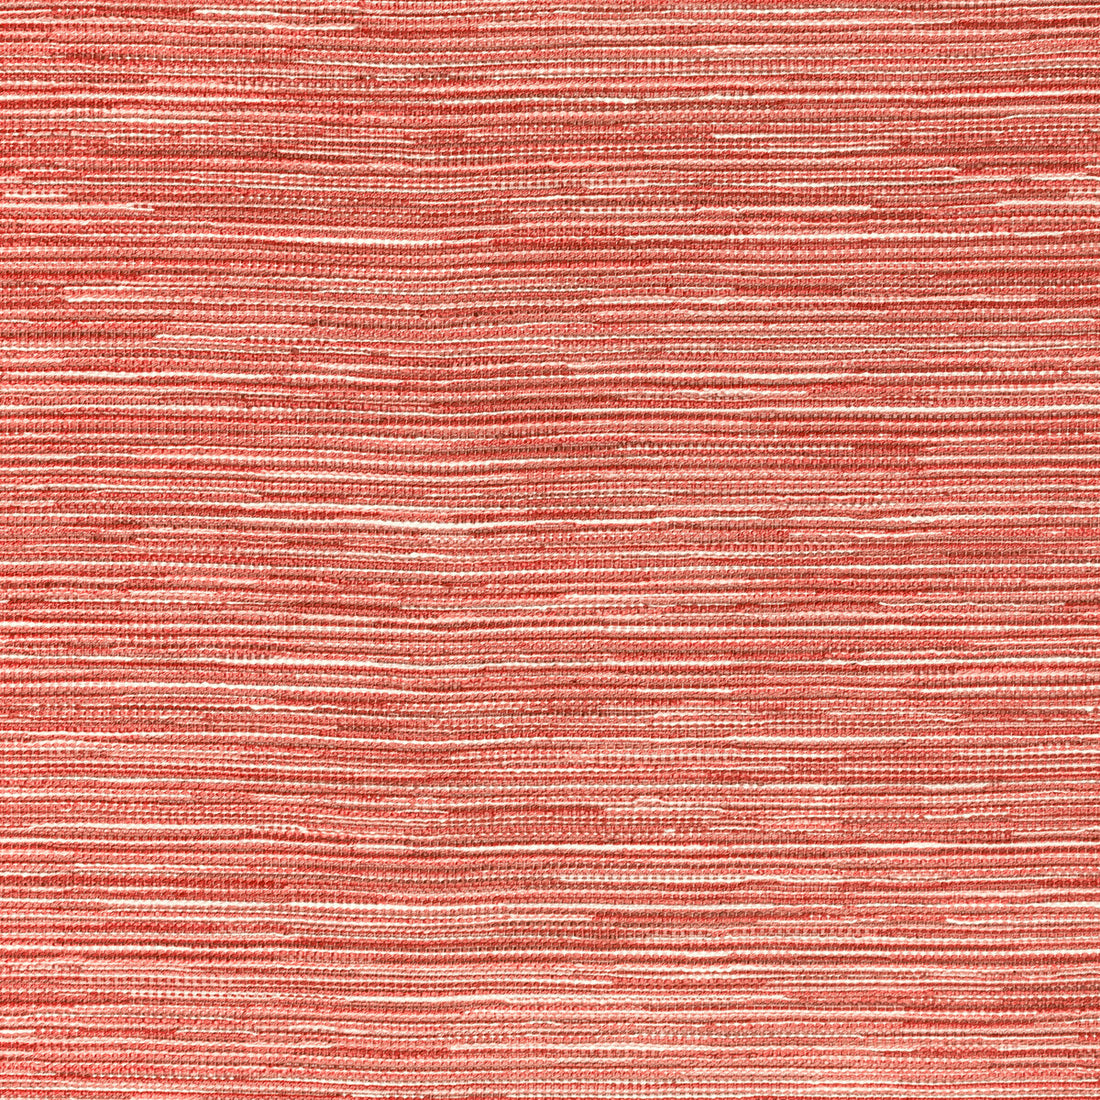 Orozco Weave fabric in brick color - pattern 2021104.19.0 - by Lee Jofa in the Triana Weaves collection